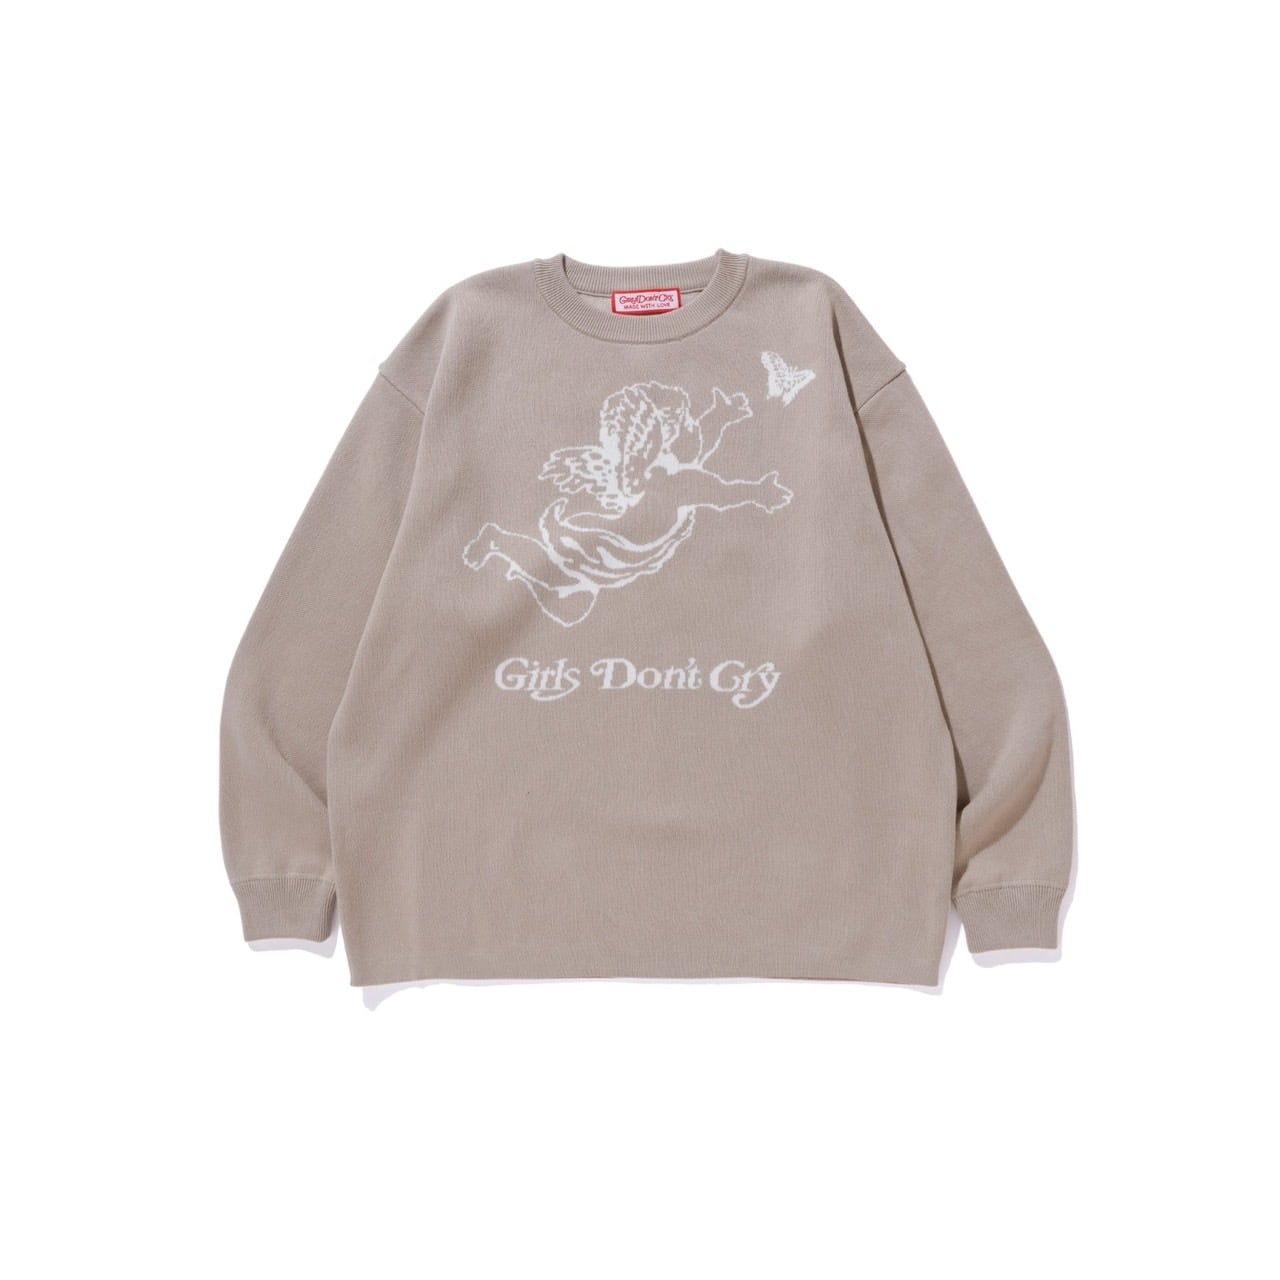 verdy girl's don't cry angel knit Lサイズ新品